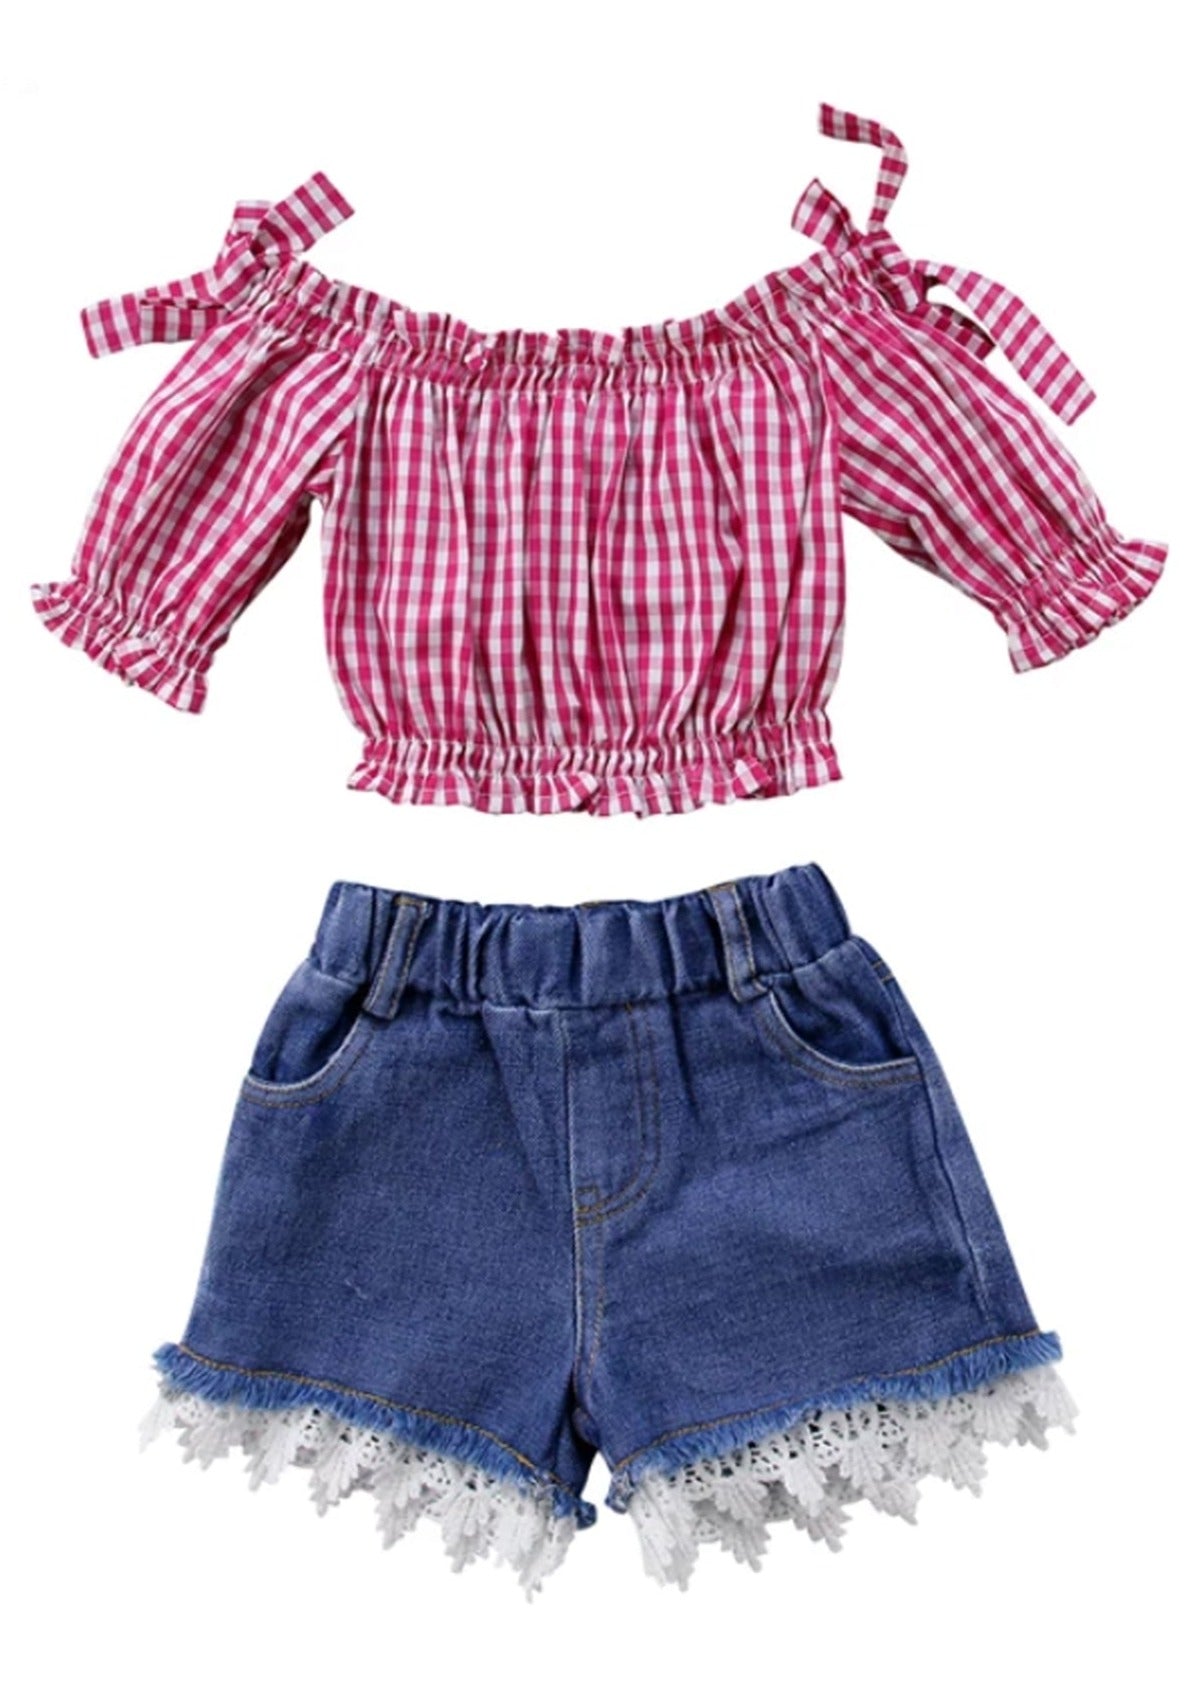 GIRLS - Denim Shorts with Red Check Top Set - Hannah Rose Vintage Boutique